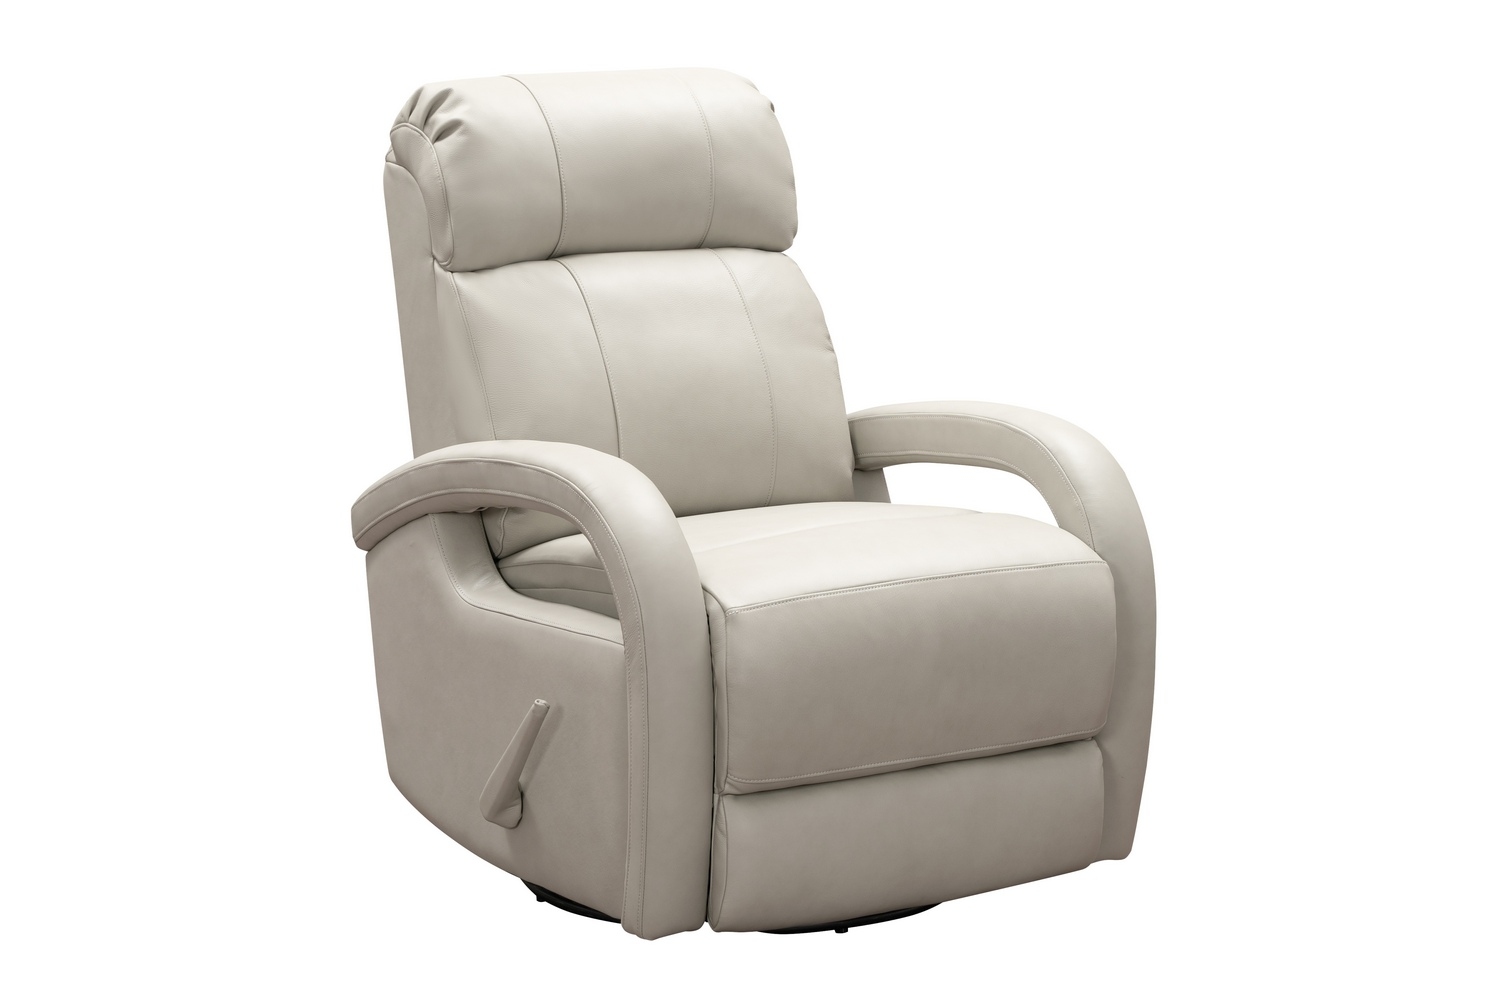 Barcalounger Harvey Swivel Glider Recliner Chair - Wenlock Dove/All Leather